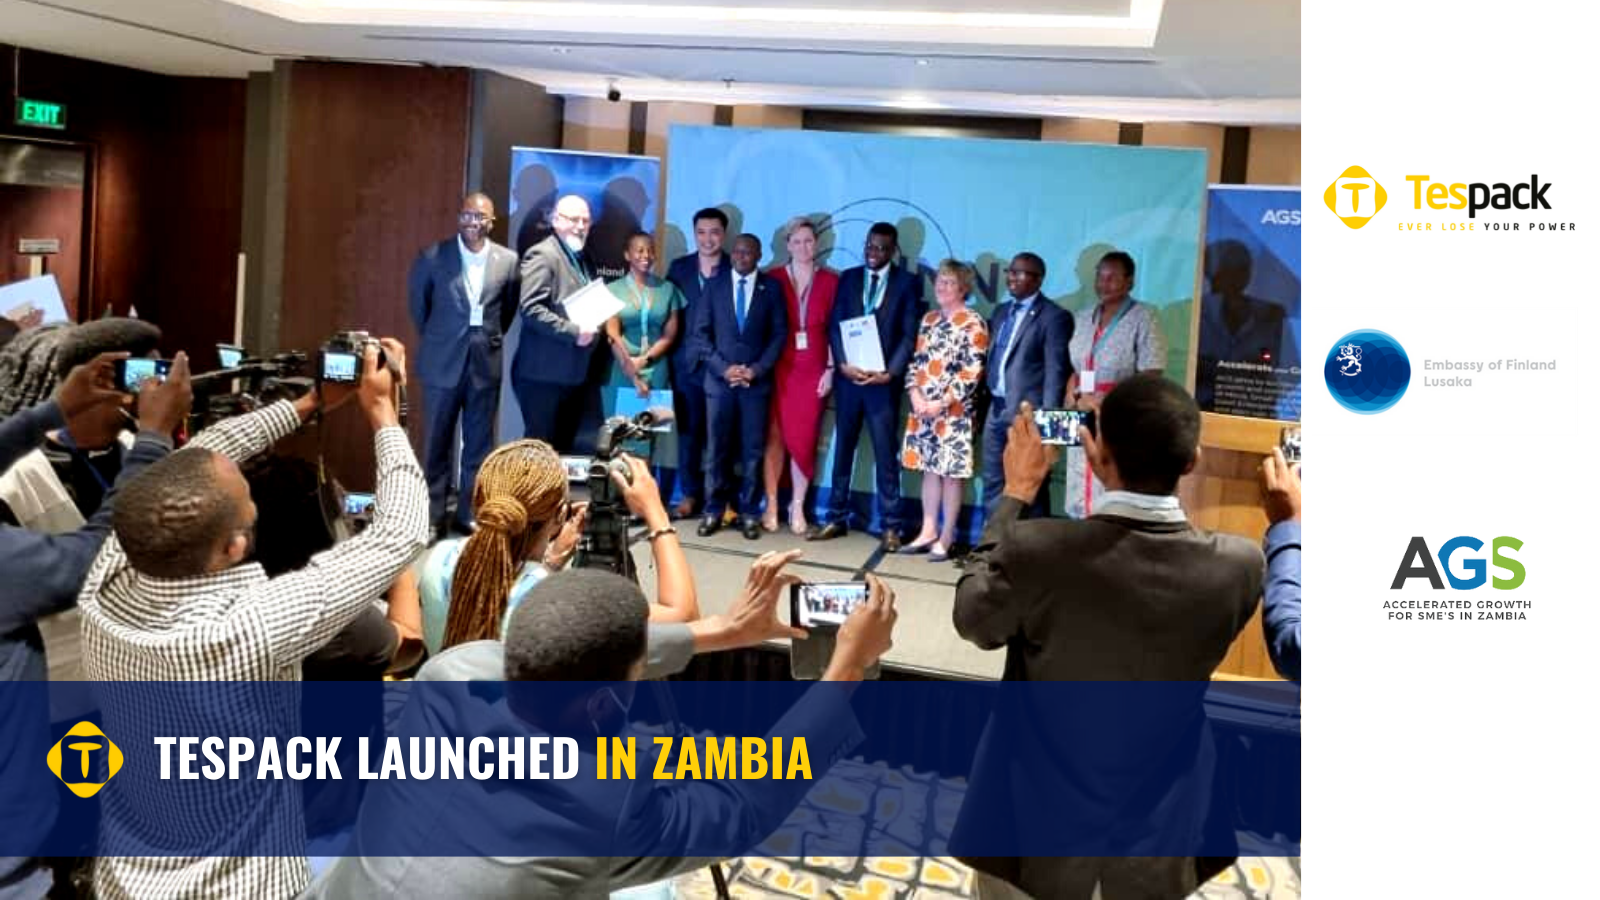 Tespack Launched in Zambia